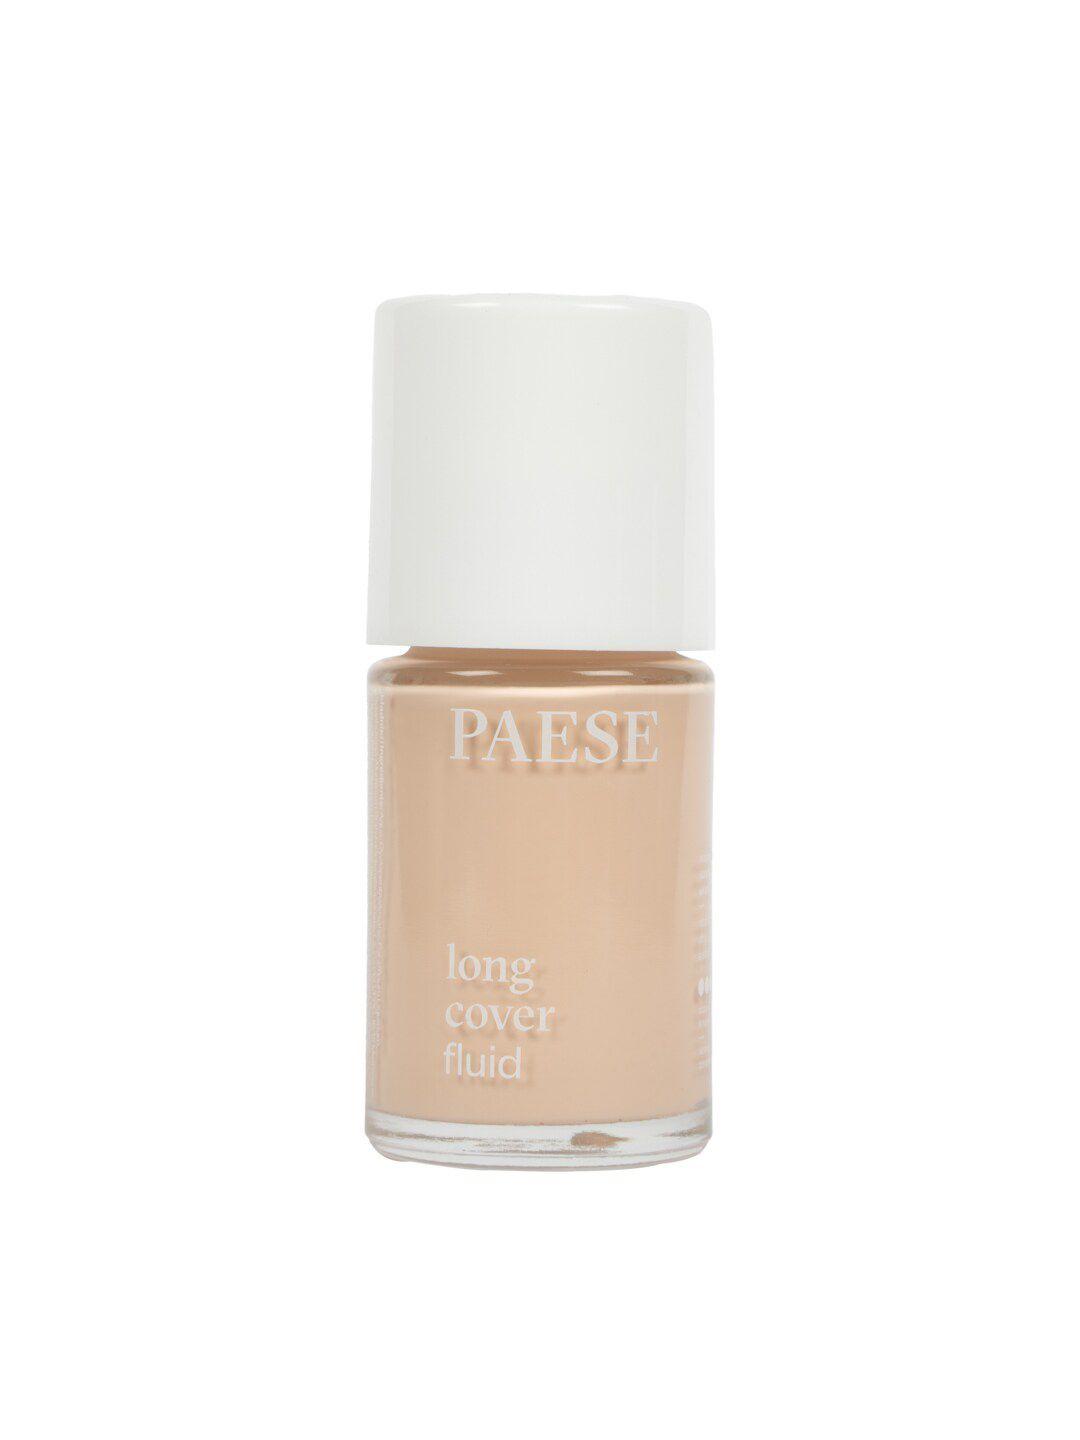 paese cosmetics long cover fluid-1-75 sand beige-30 ml